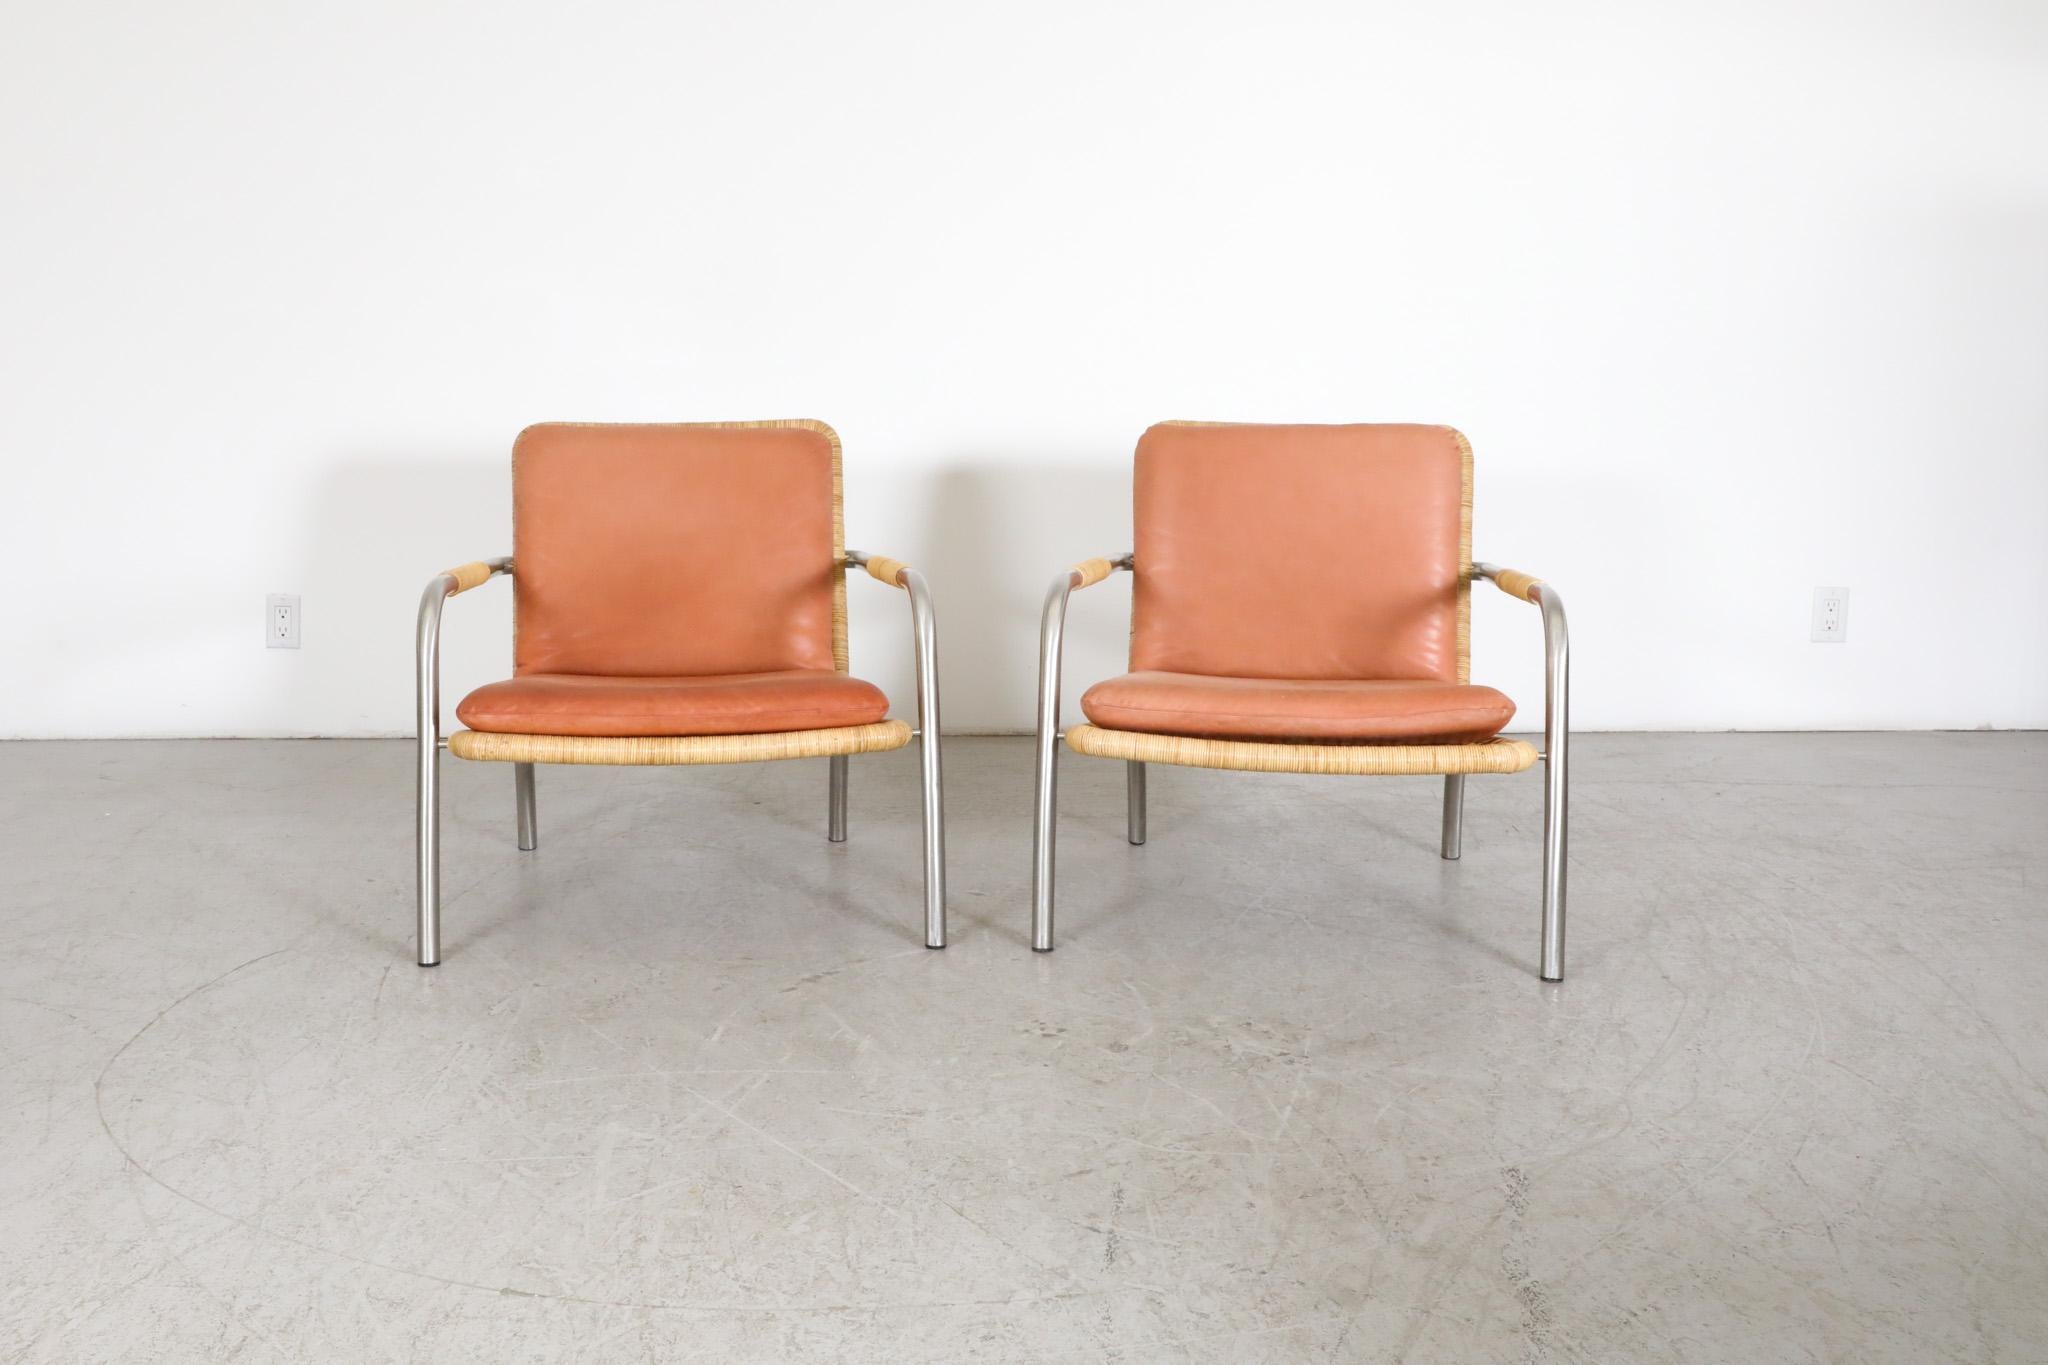 Stunning pair of Mid-Century, Martin Visser style woven rattan lounge chairs with lovely terracotta toned leather cushions on sturdy bent chrome frames. Handsome and comfortable lounge chairs with a beautiful balance of metal and leather and